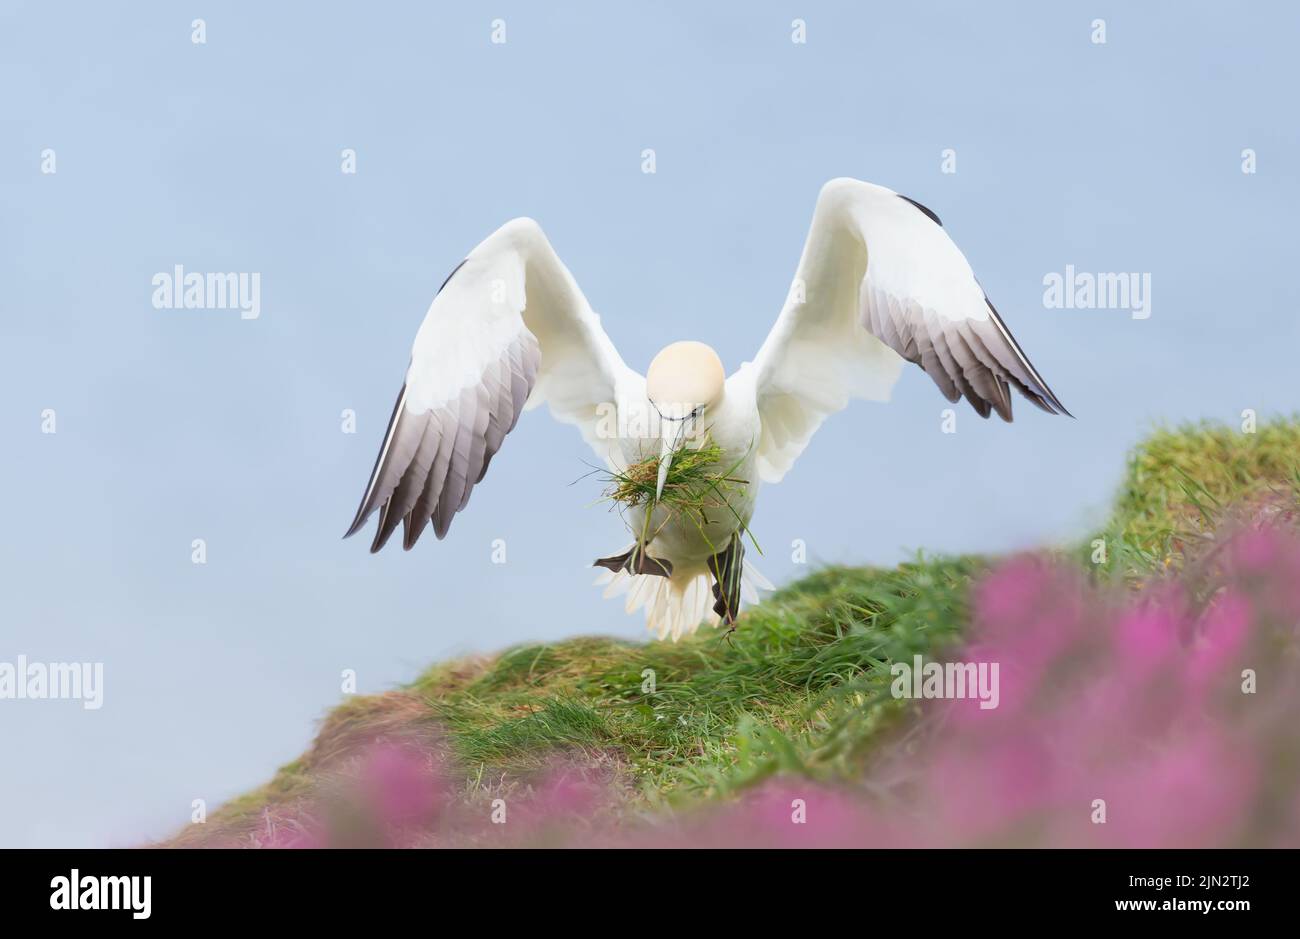 Close up of a Northern gannet (Morus bassana) with a beak full of nesting material taking off, Bempton cliffs, UK. Stock Photo